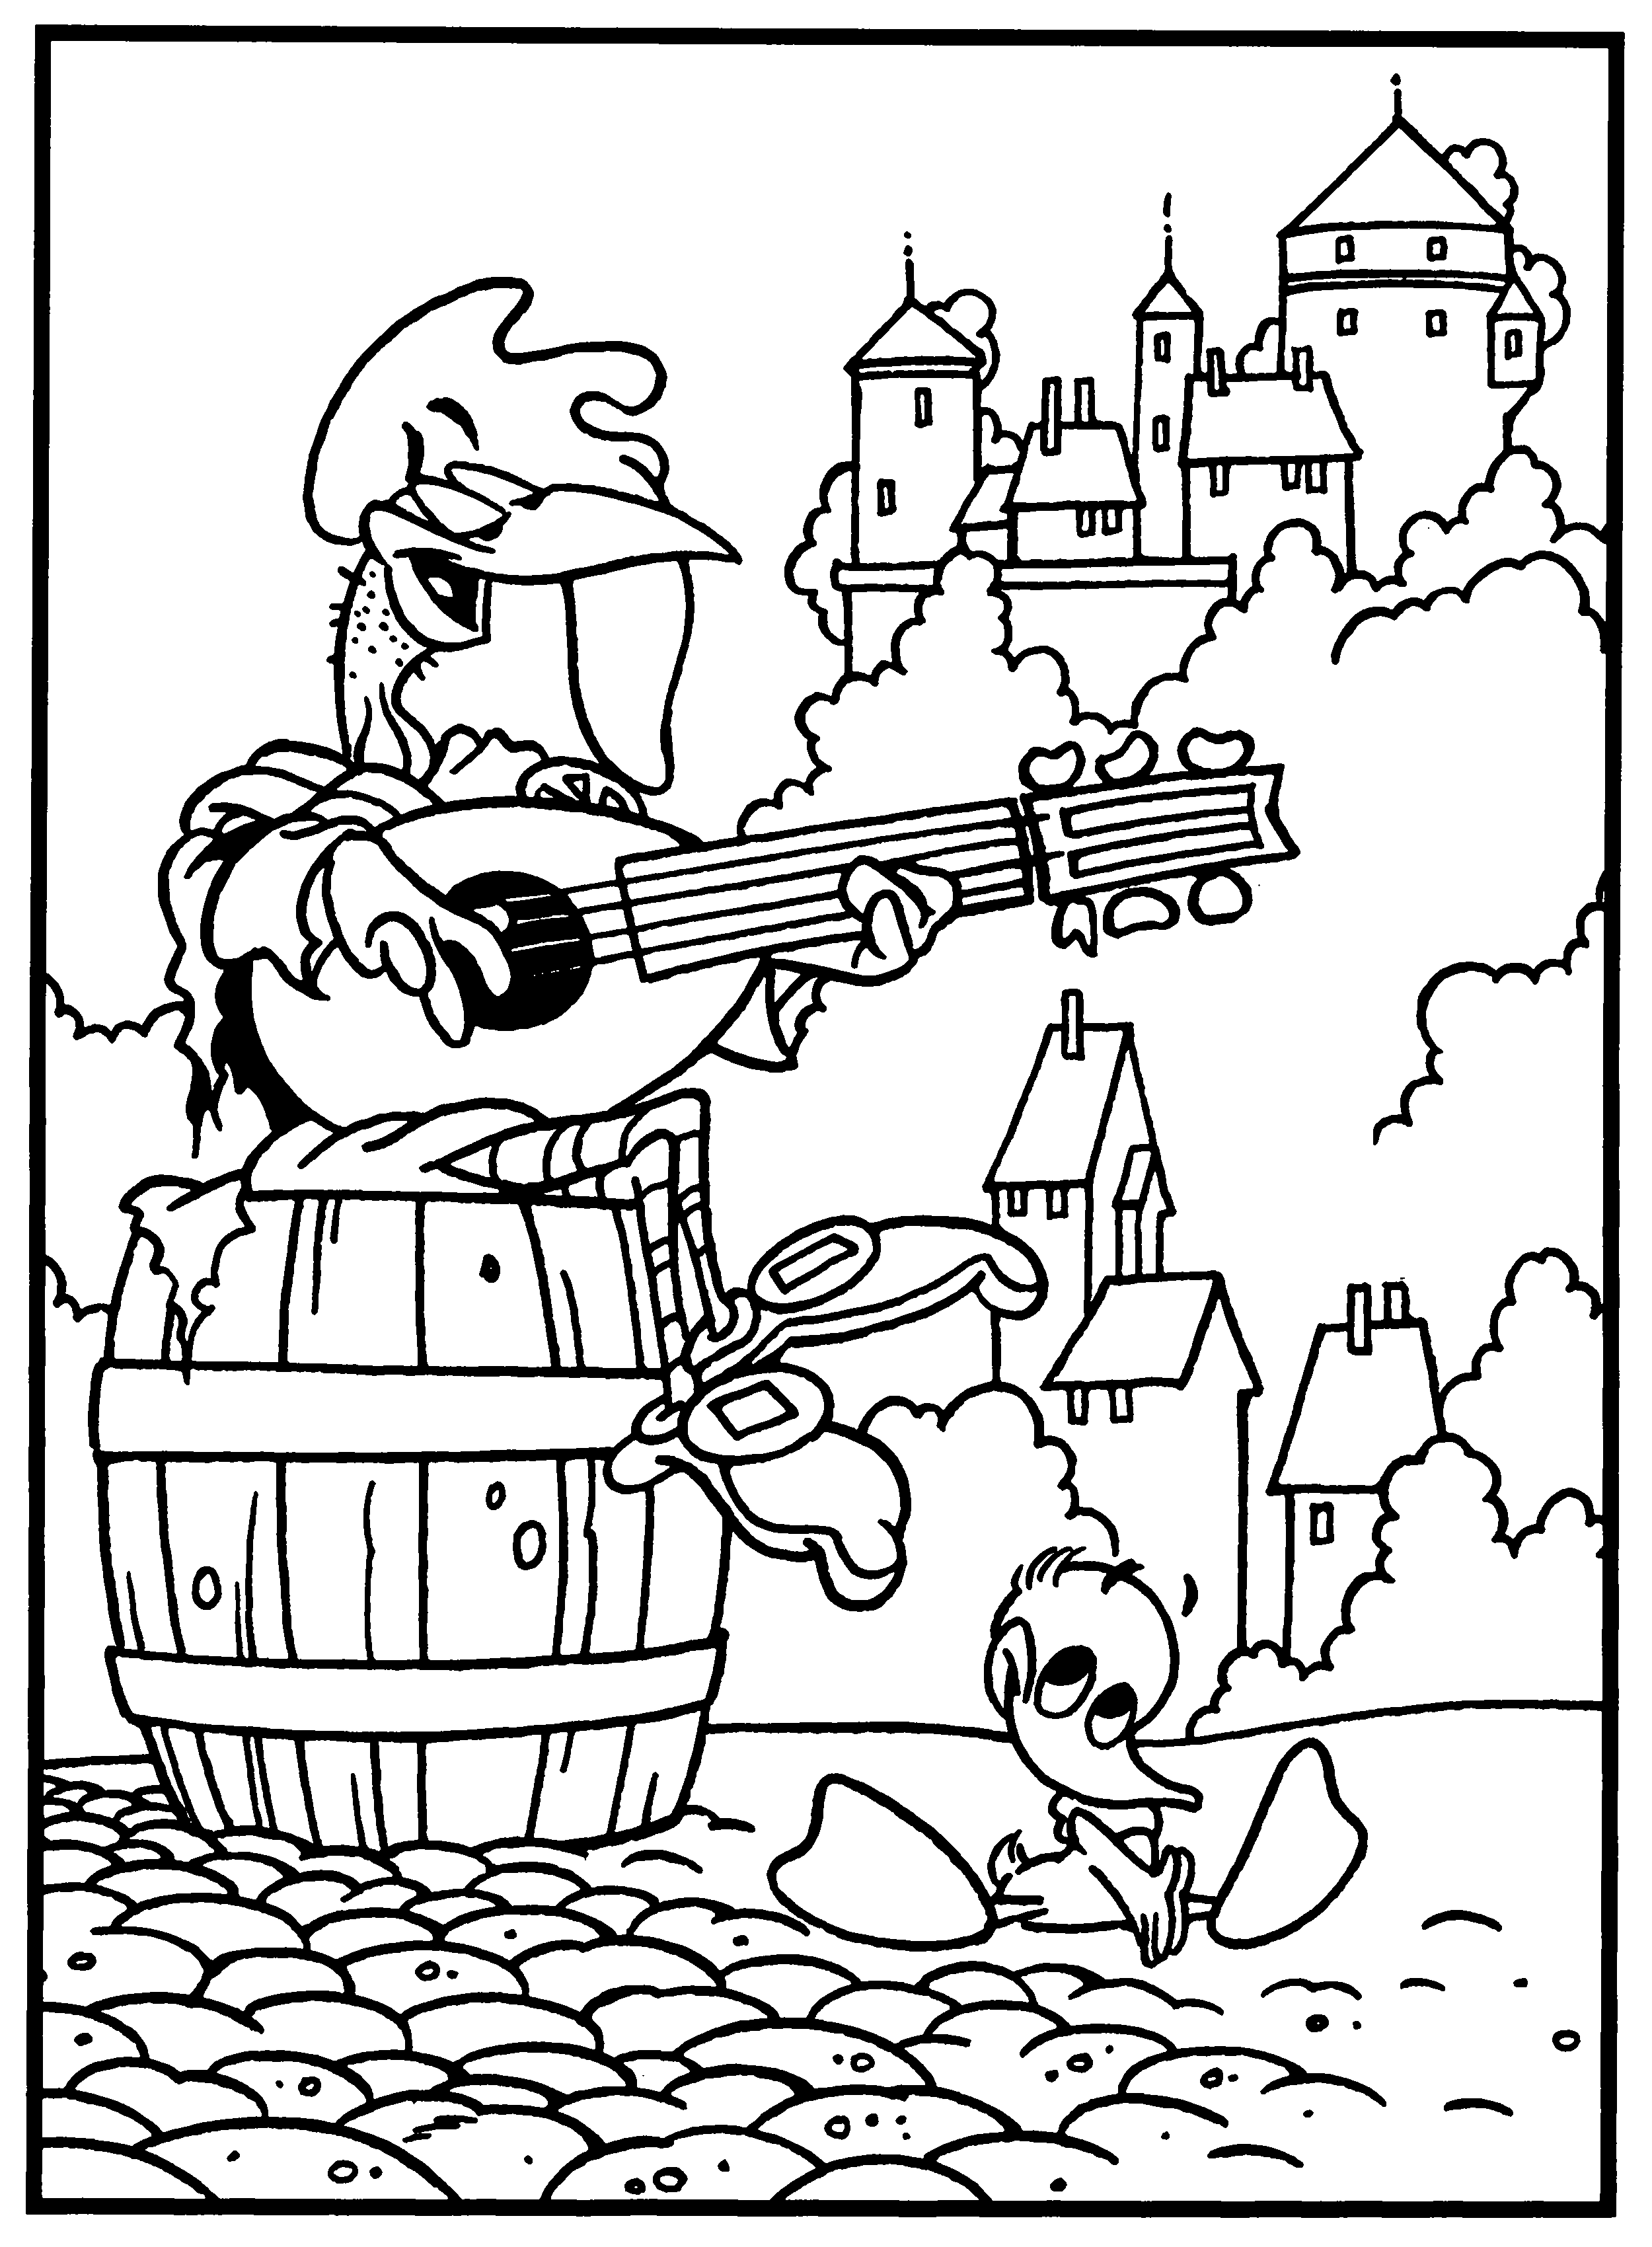 Alfred j kwak coloring pages